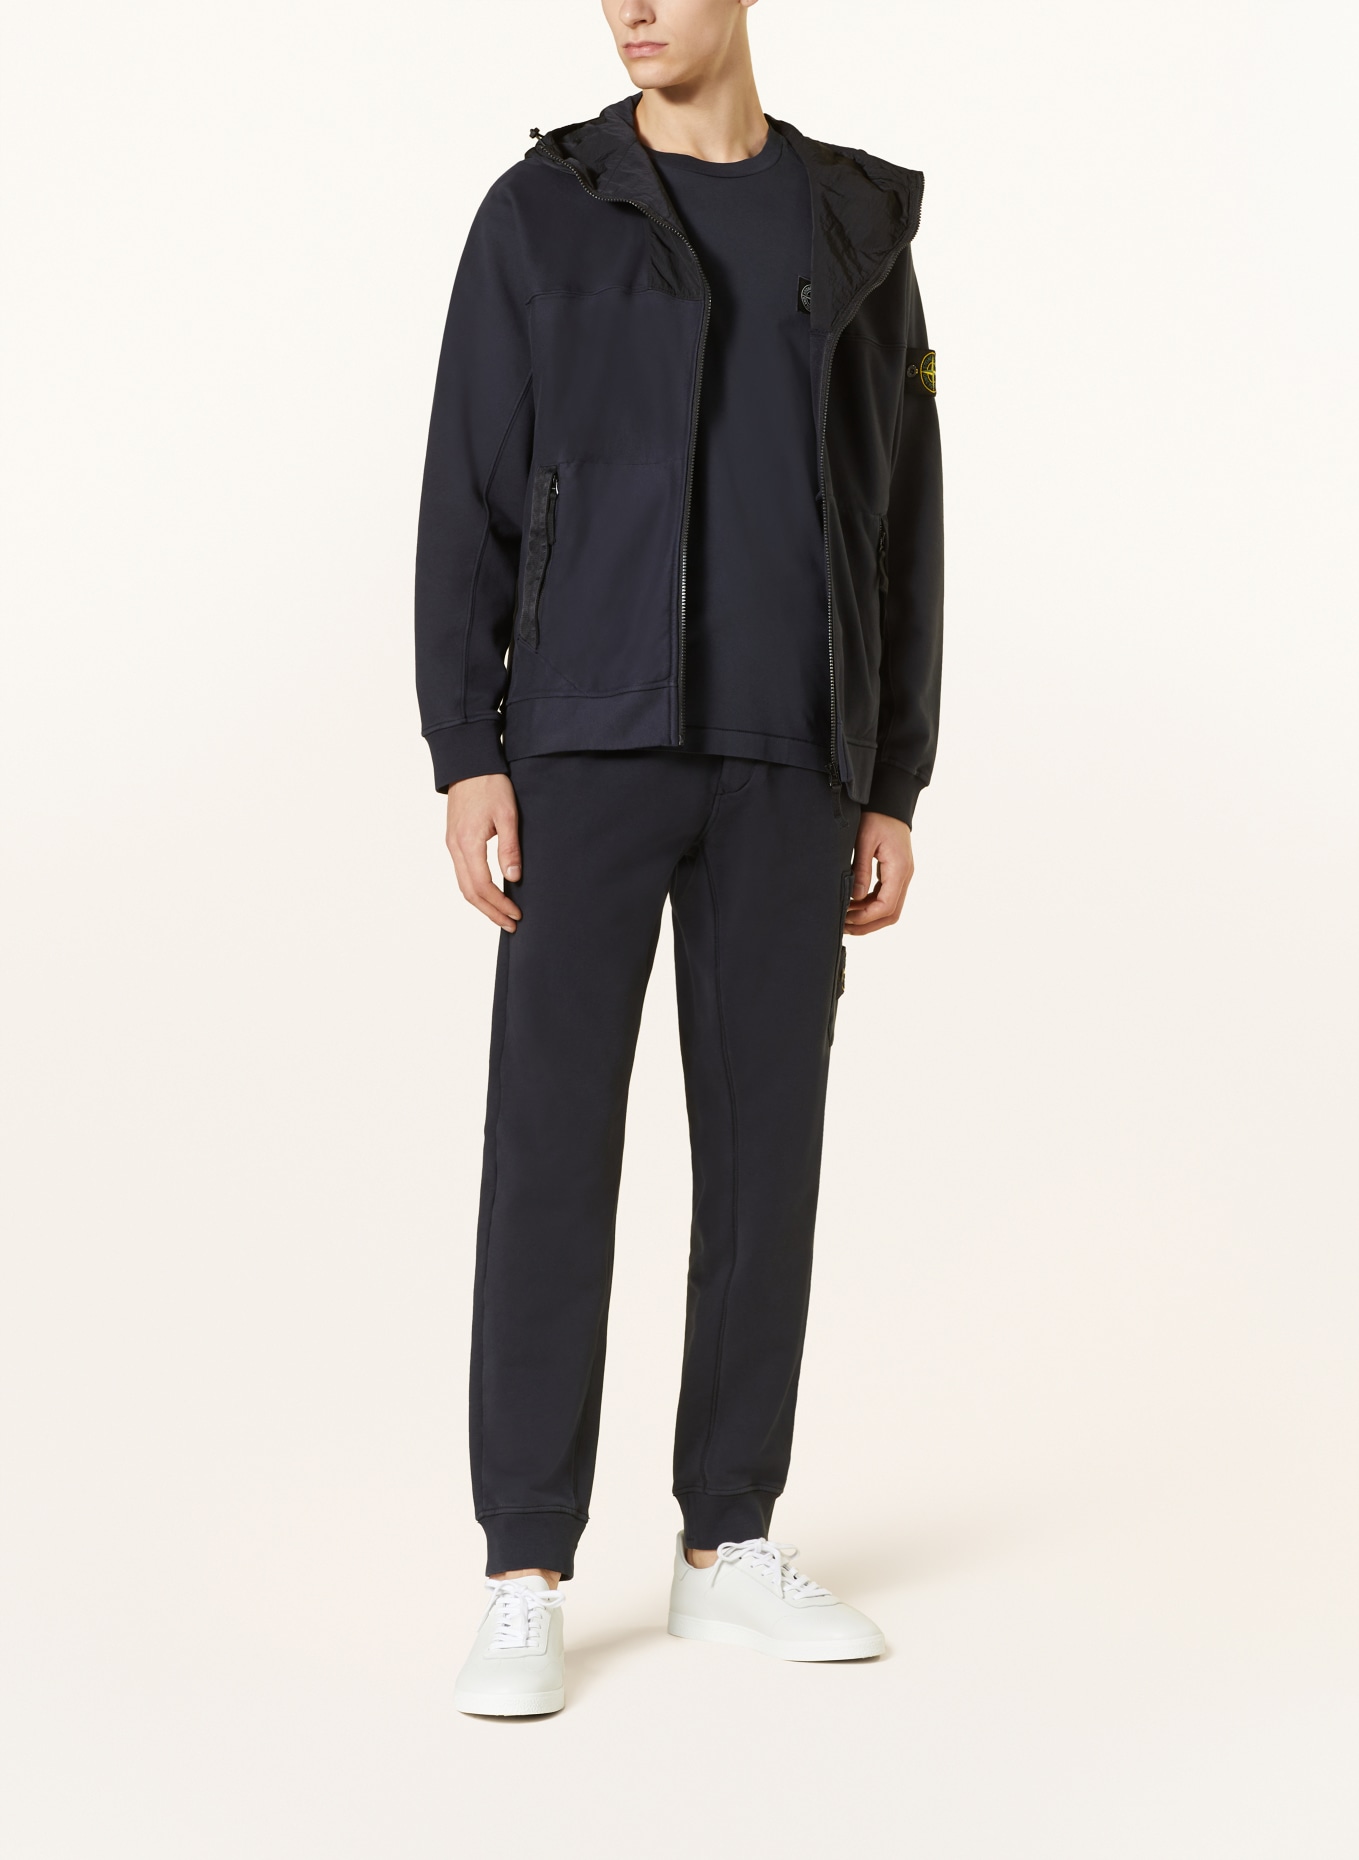 STONE ISLAND Sweat jacket in mixed materials, Color: DARK BLUE/ BLACK (Image 2)